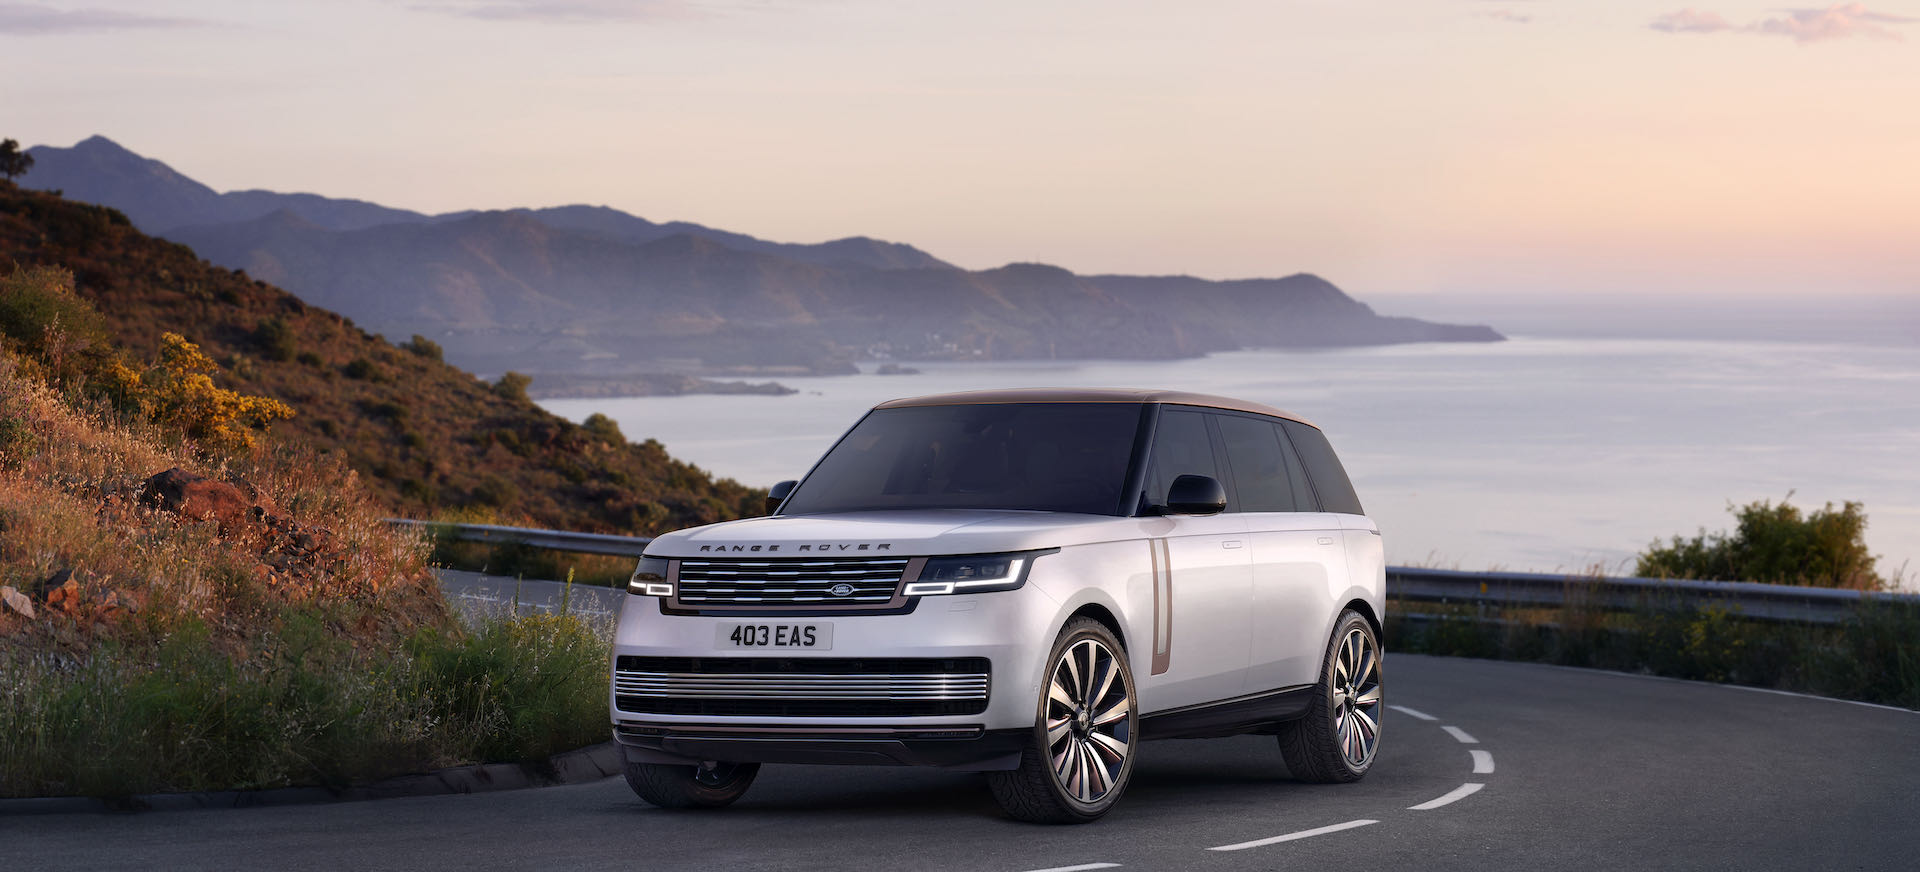 Buy your Land Rover online with Rockar Land Rover Canary Wharf